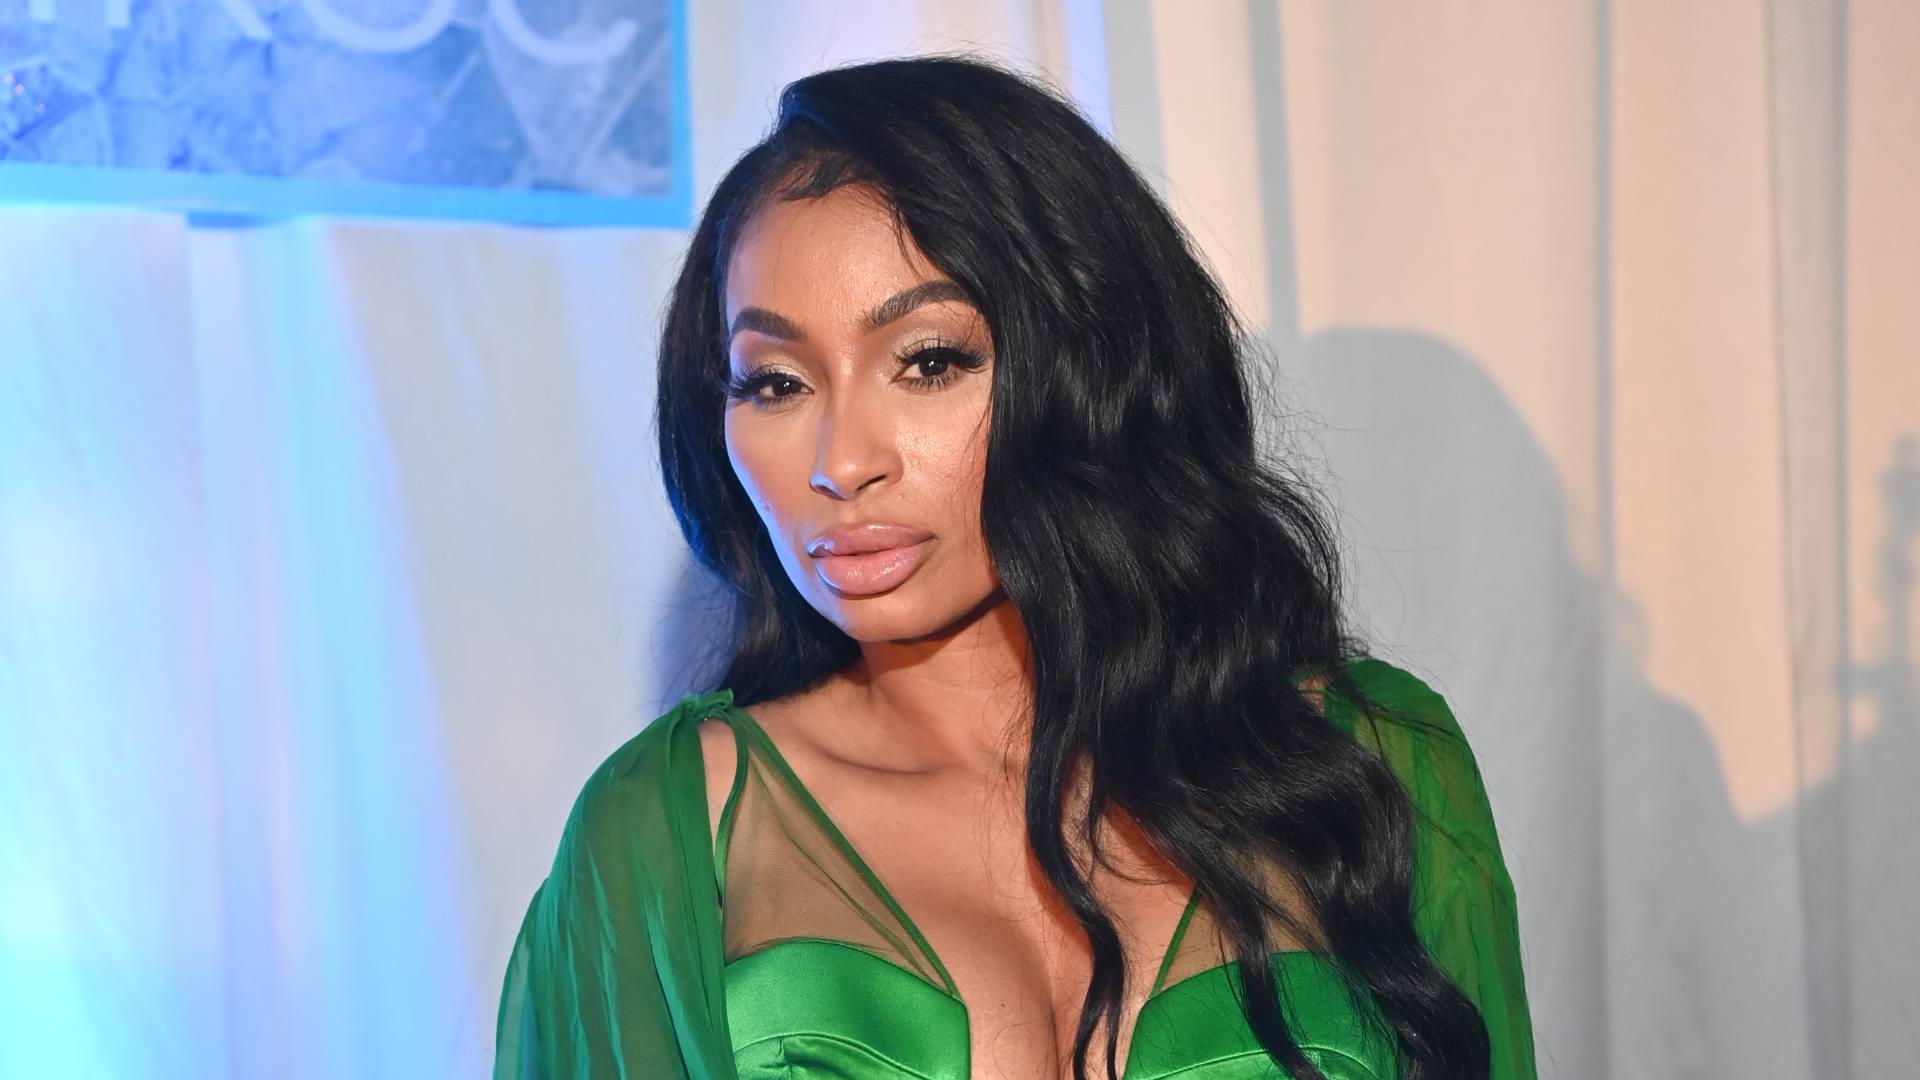 Karlie Redd attends 2nd Annual The Black Ball Quality Control's CEO Pierre "Pee" Thomas Birthday Celebration at Fox Theater on June 1, 2022 in Atlanta, Georgia.